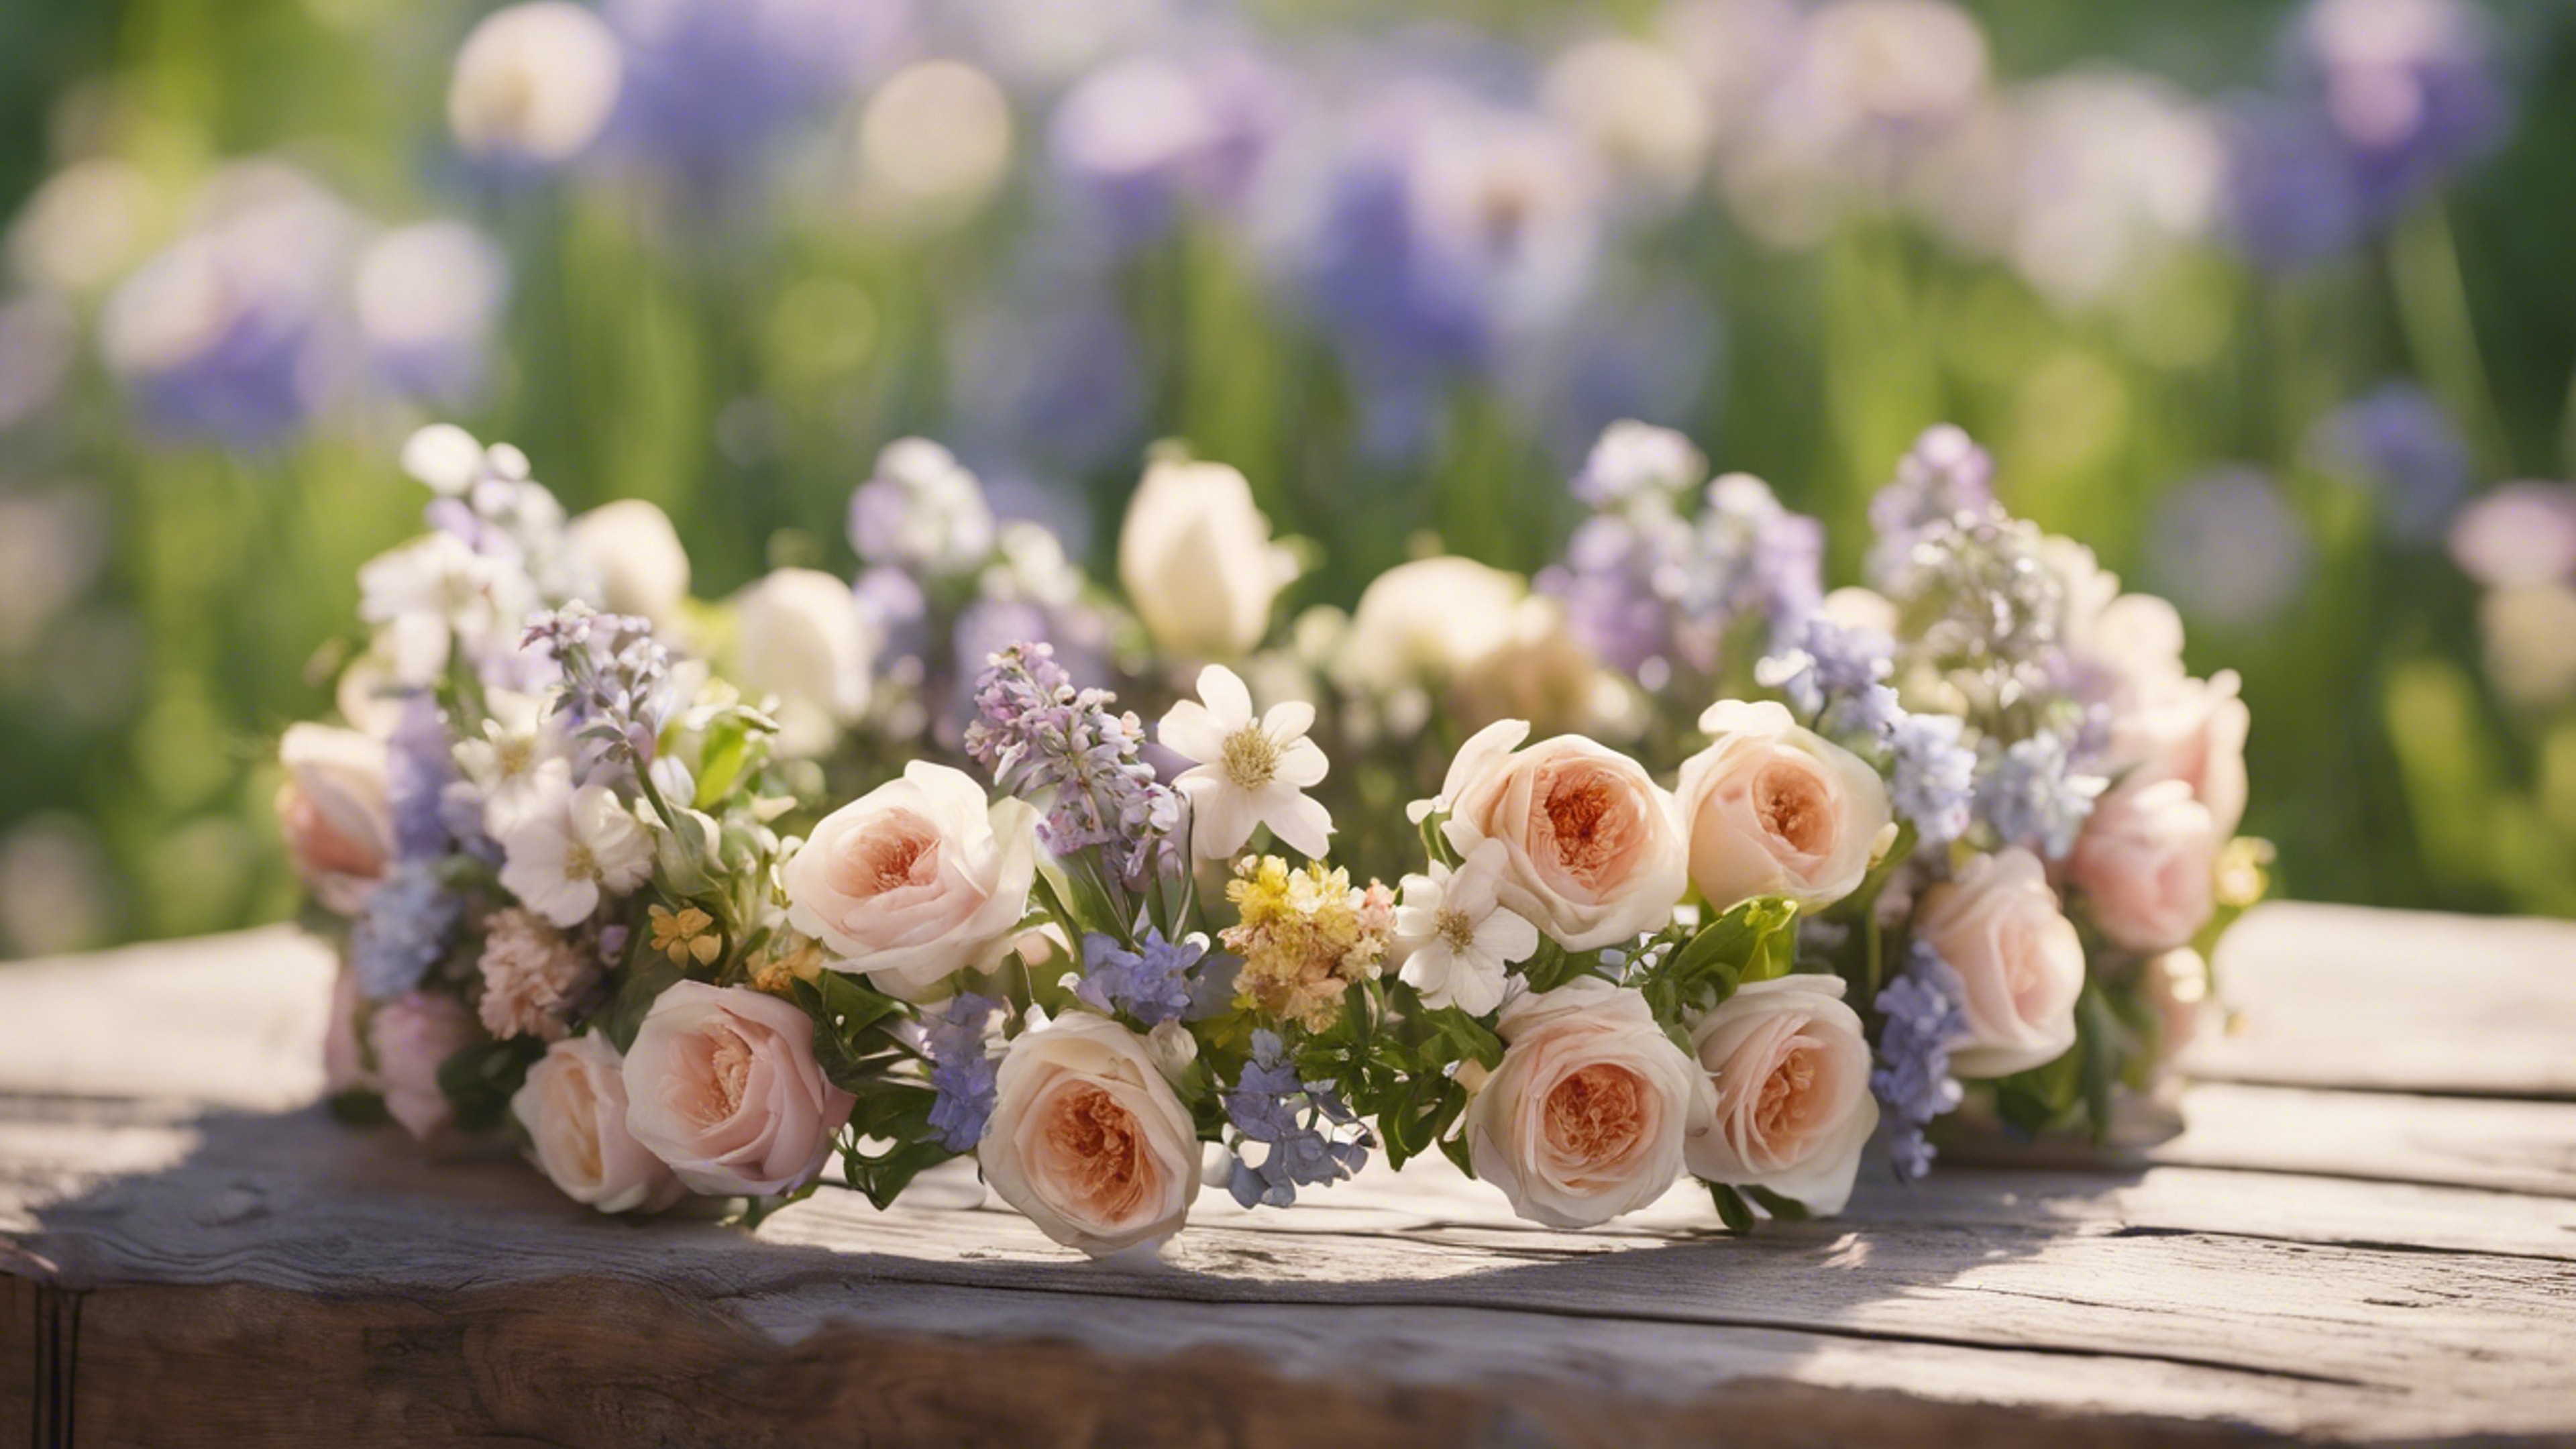 A crown made of fresh spring flowers on a wooden table outdoors. ផ្ទាំង​រូបភាព[d5115d6a32bf47389ae3]